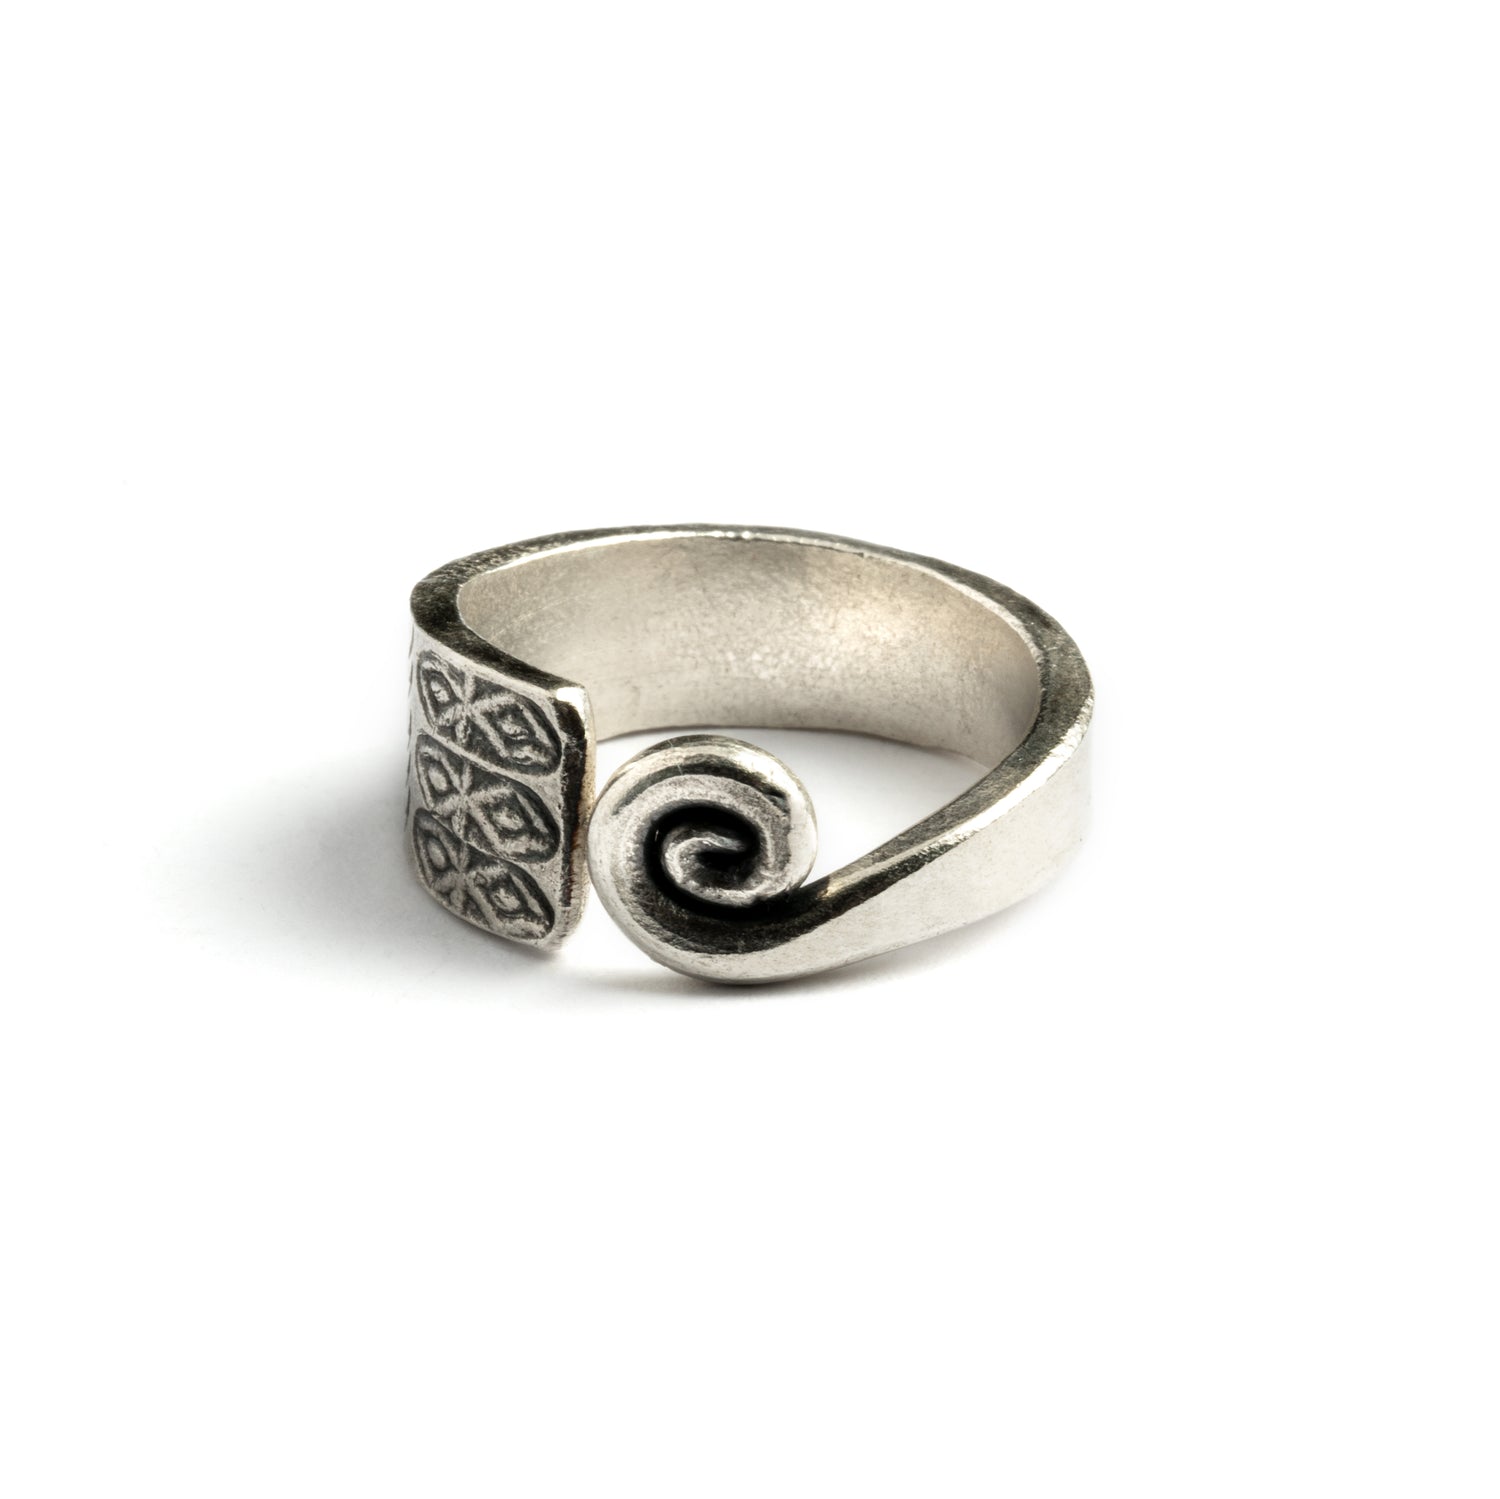 Hill Tribe Silver Ring right side view